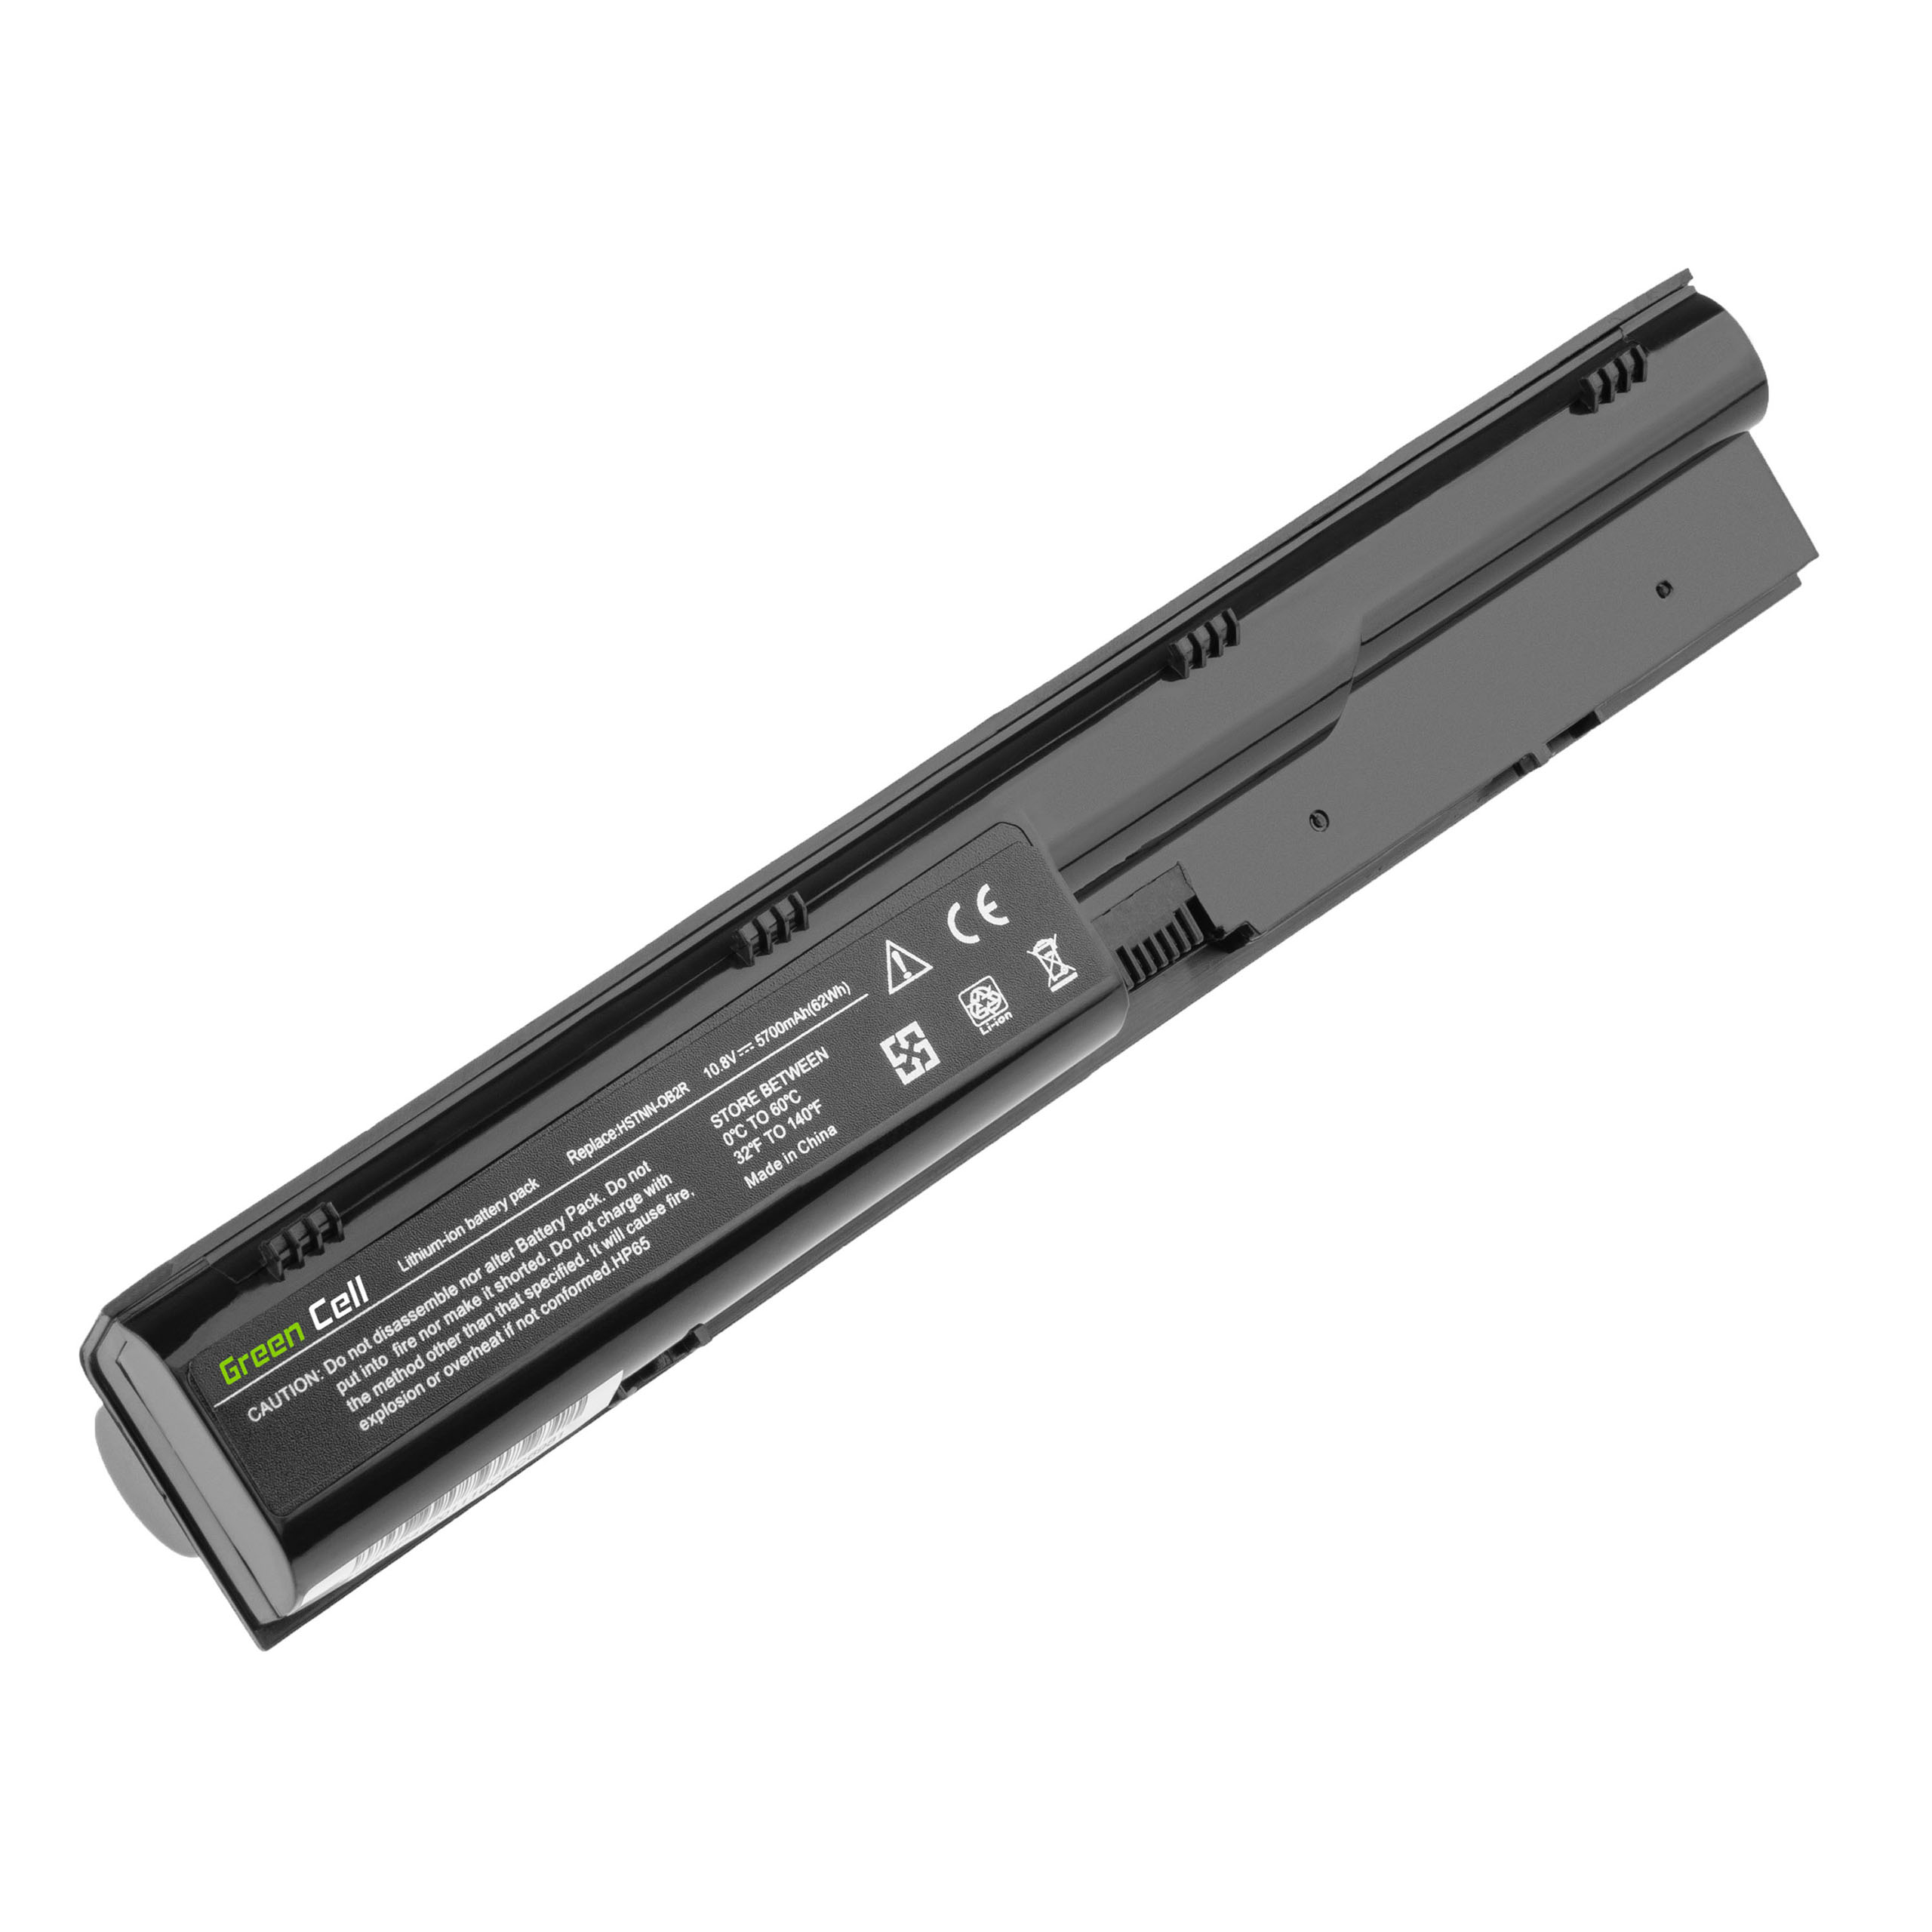 Battery Green Cell PR09 to HP Probook 4330s 4430s 4440s 4530s 4540s